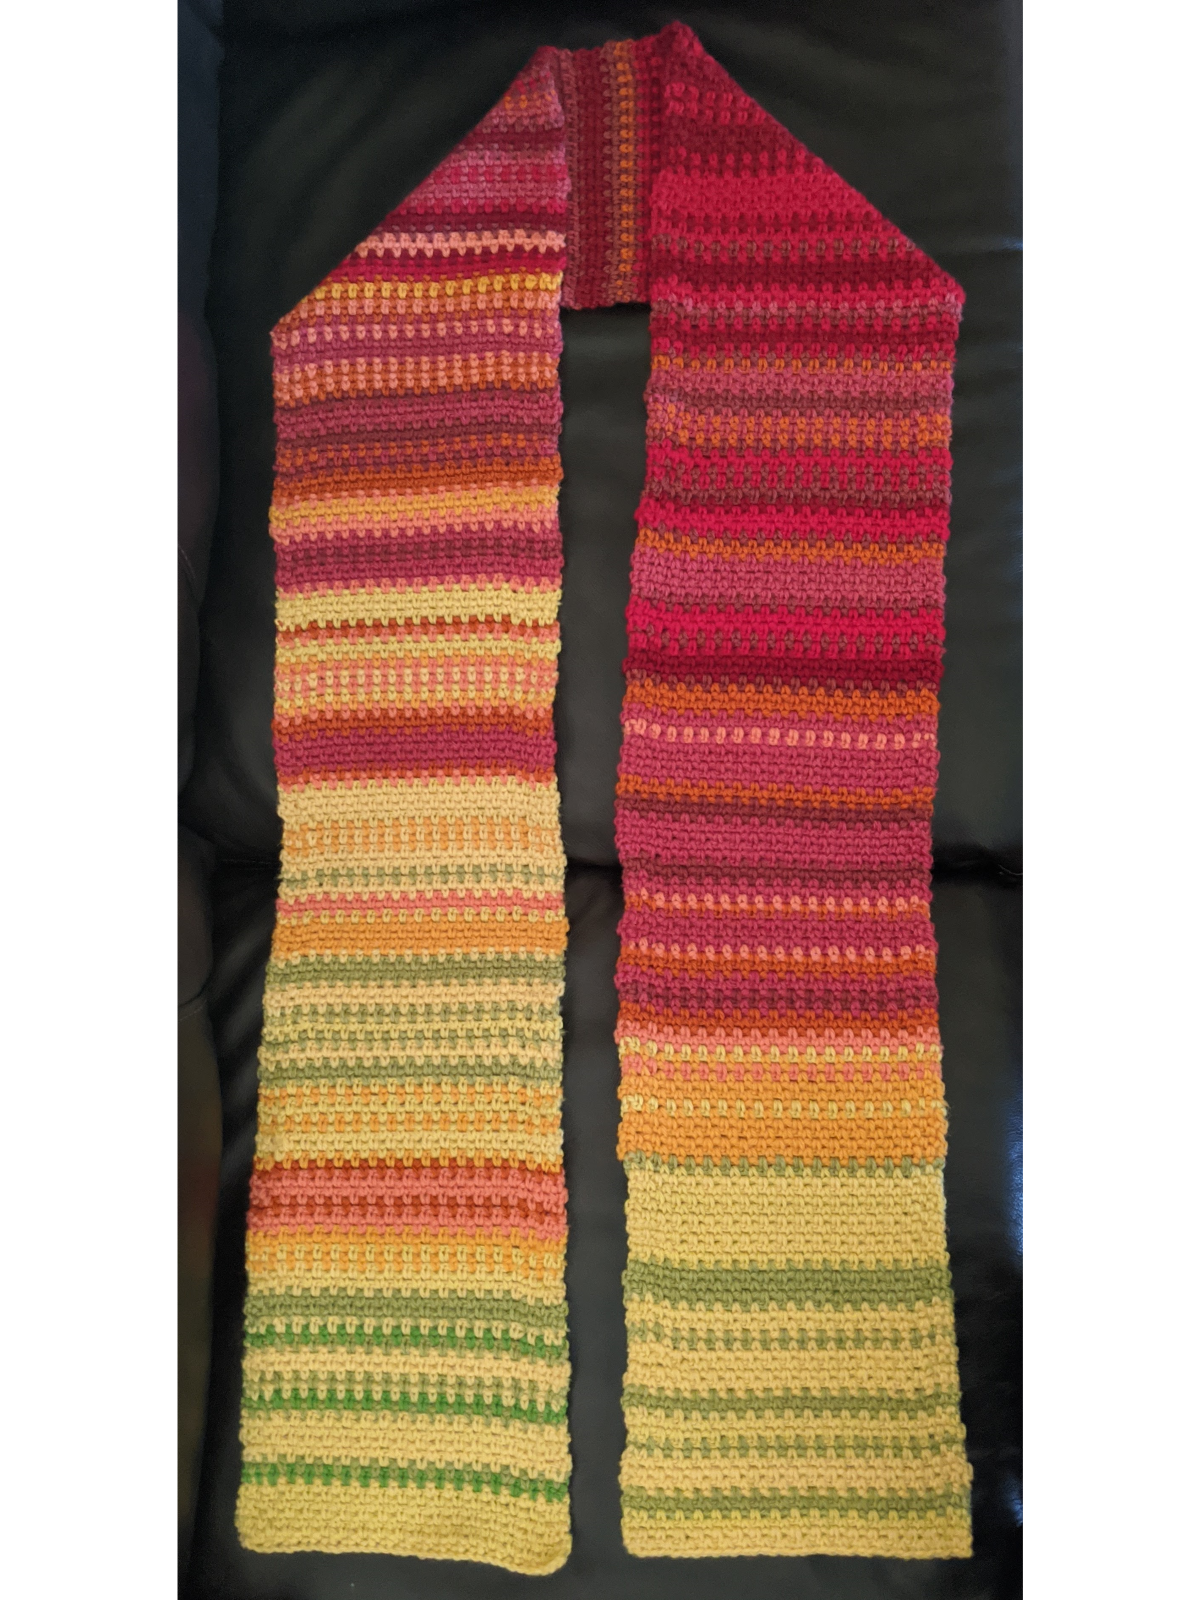 Scarf representing the daily temperatures of Davis in 2018